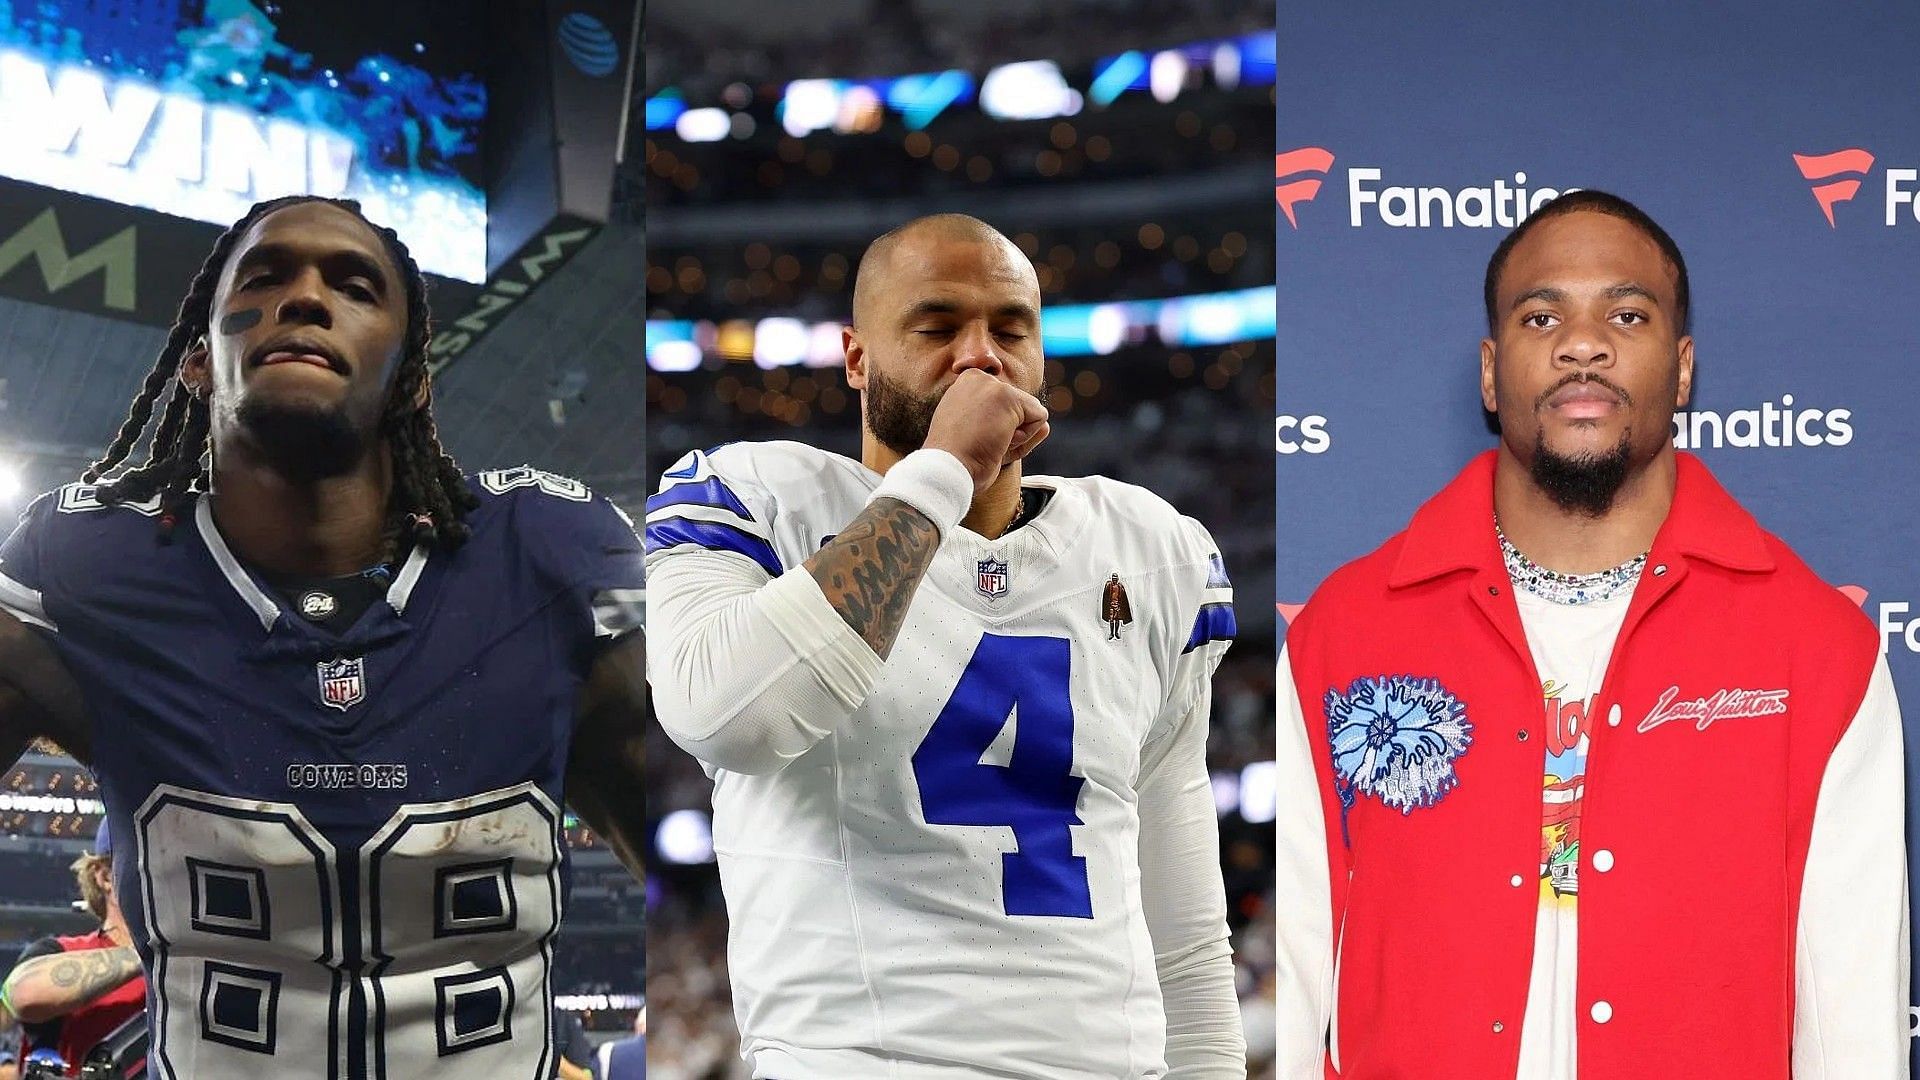 Former Jets executive claims Dallas Cowboys can pay Dak Prescott, CeeDee Lamb, Micah Parsons and make additional free agency splash